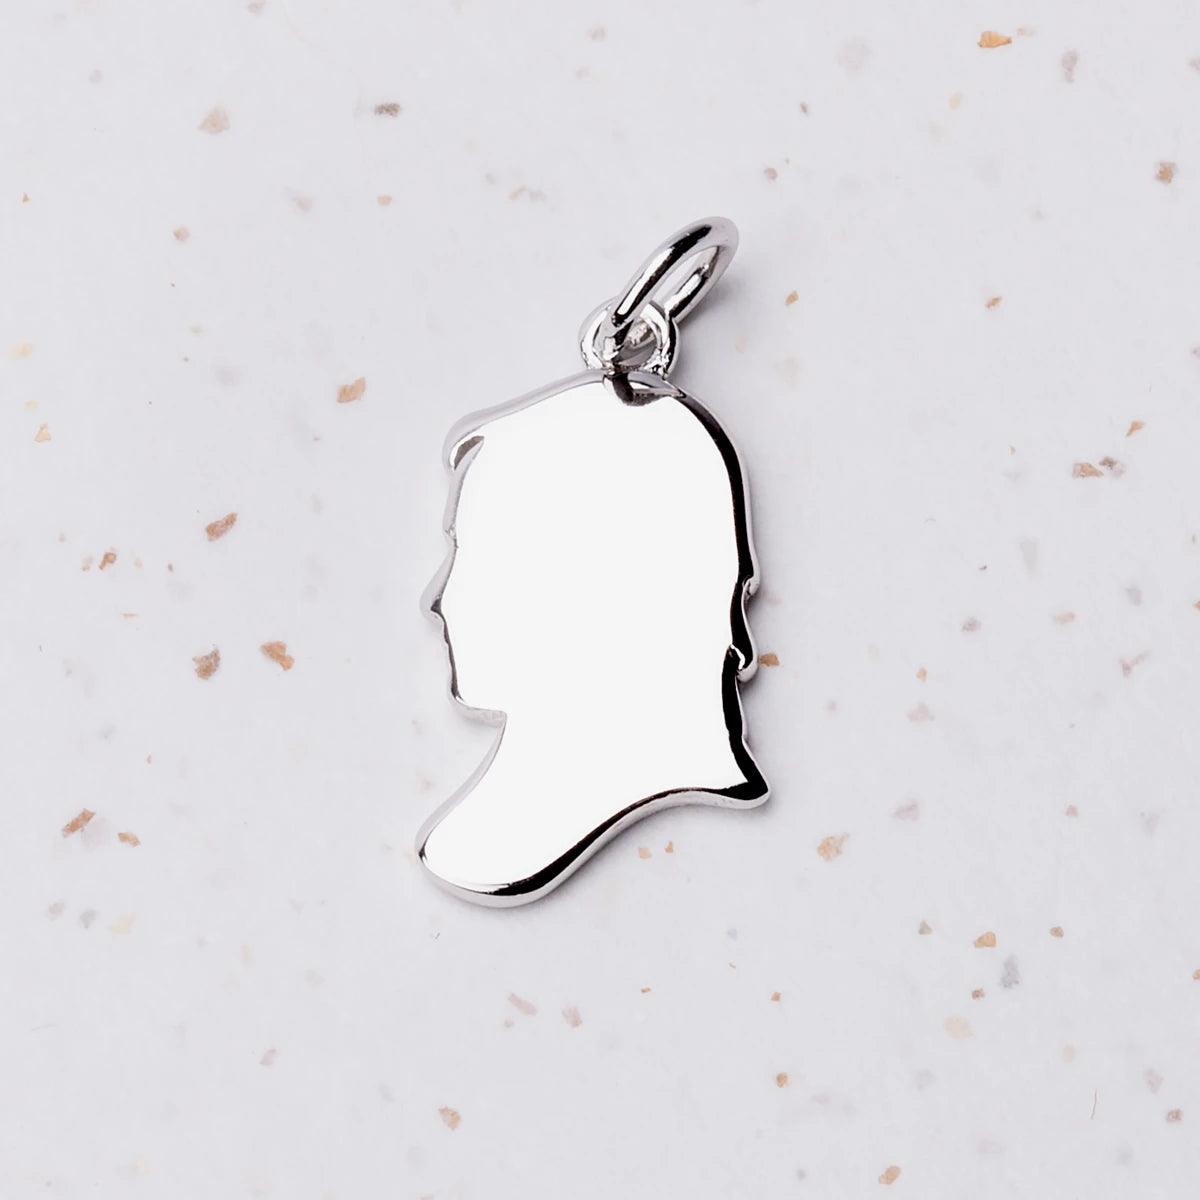 Mr. Darcy Inscribed Silhouette Charm - JaneAusten.co.uk